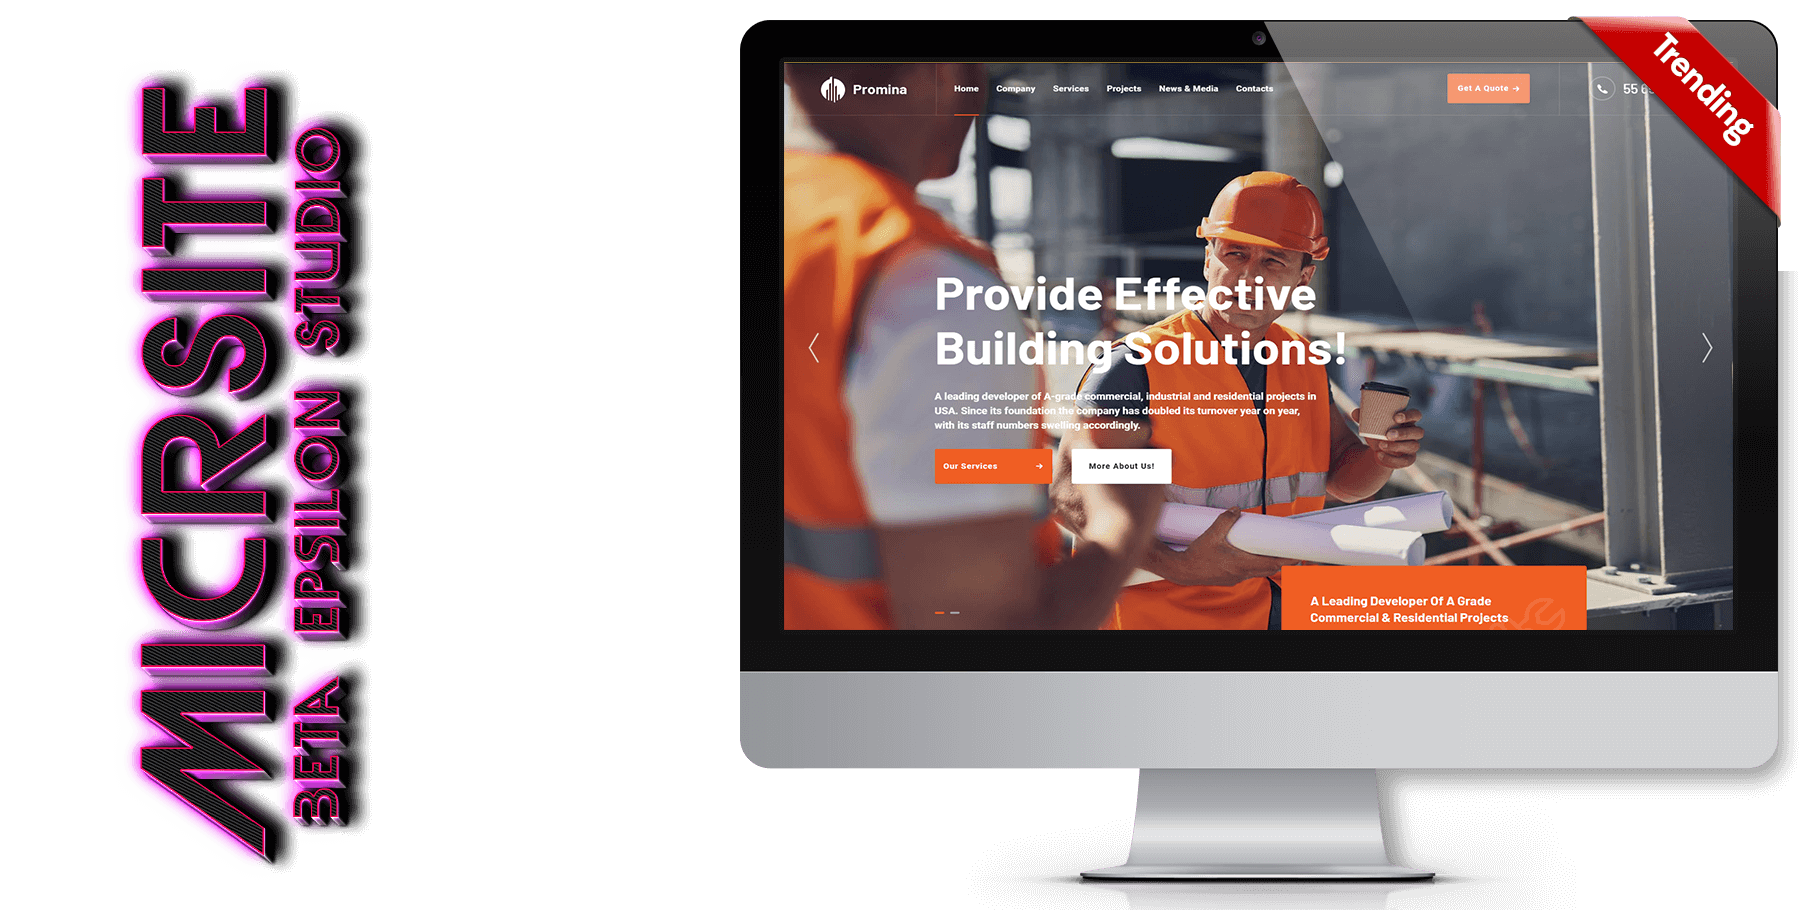 A website design in construction named Promina